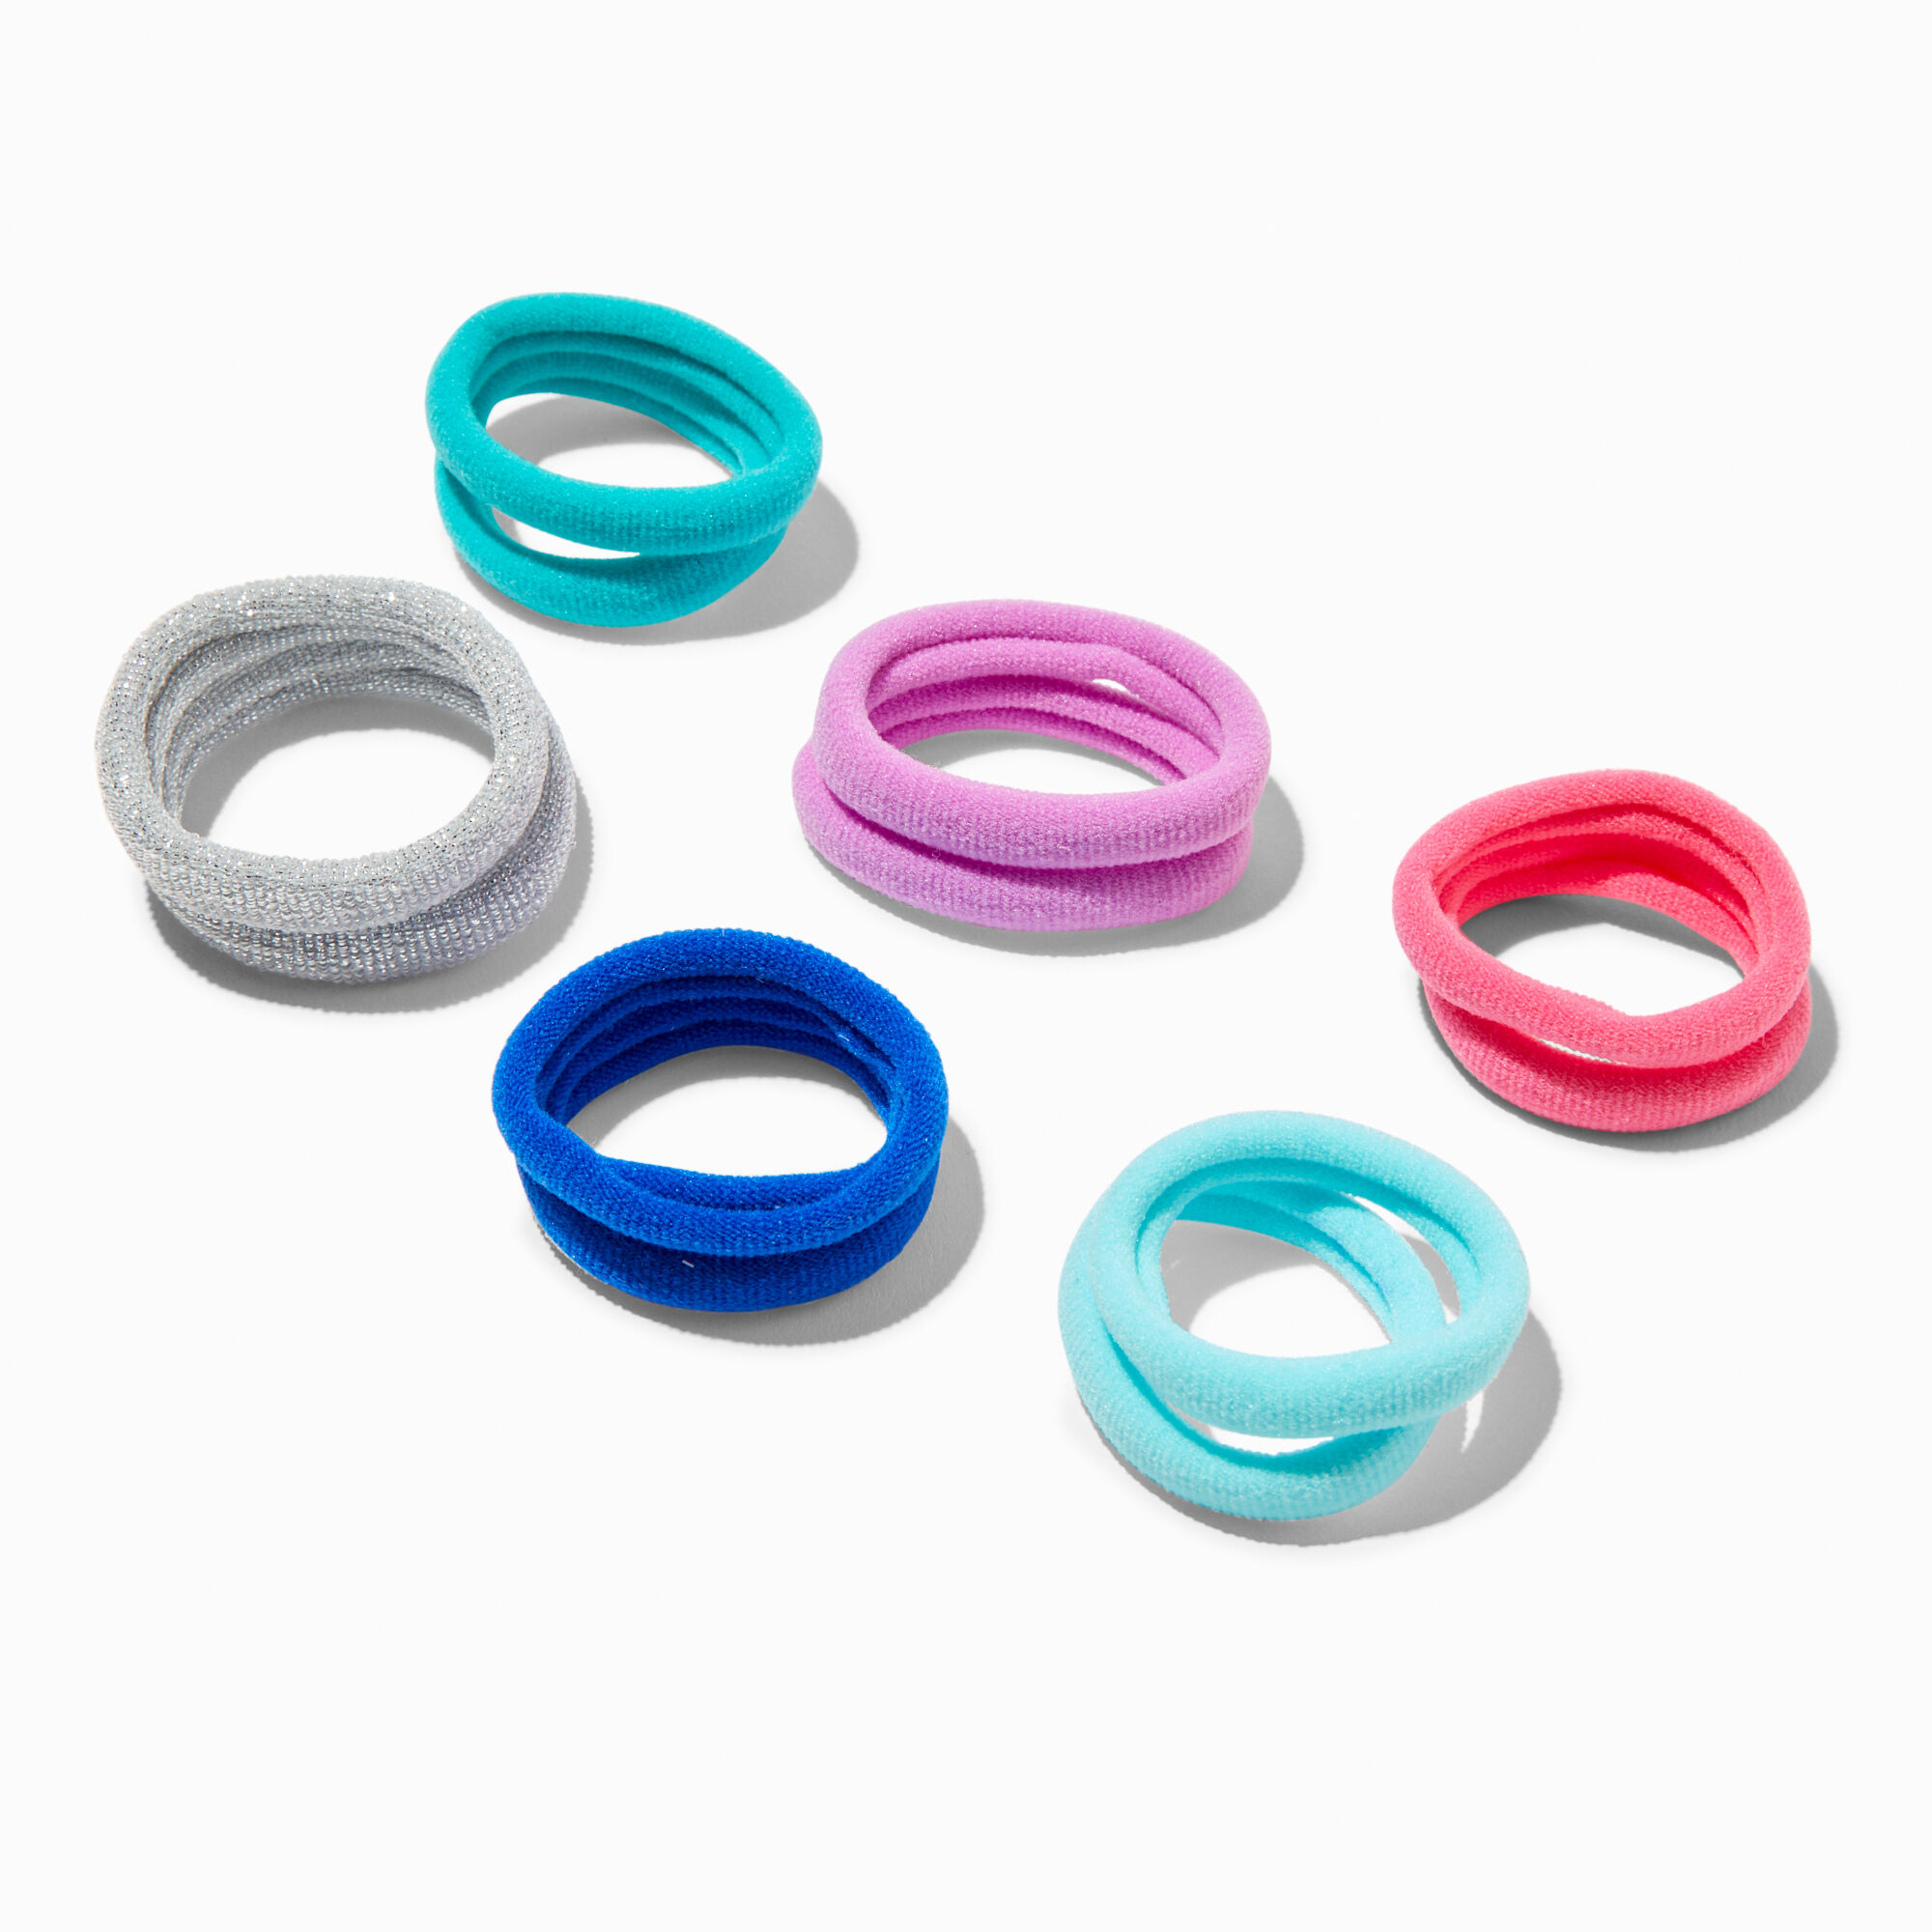 View Claires Club Jewel Tone Hair Ties 12 Pack information